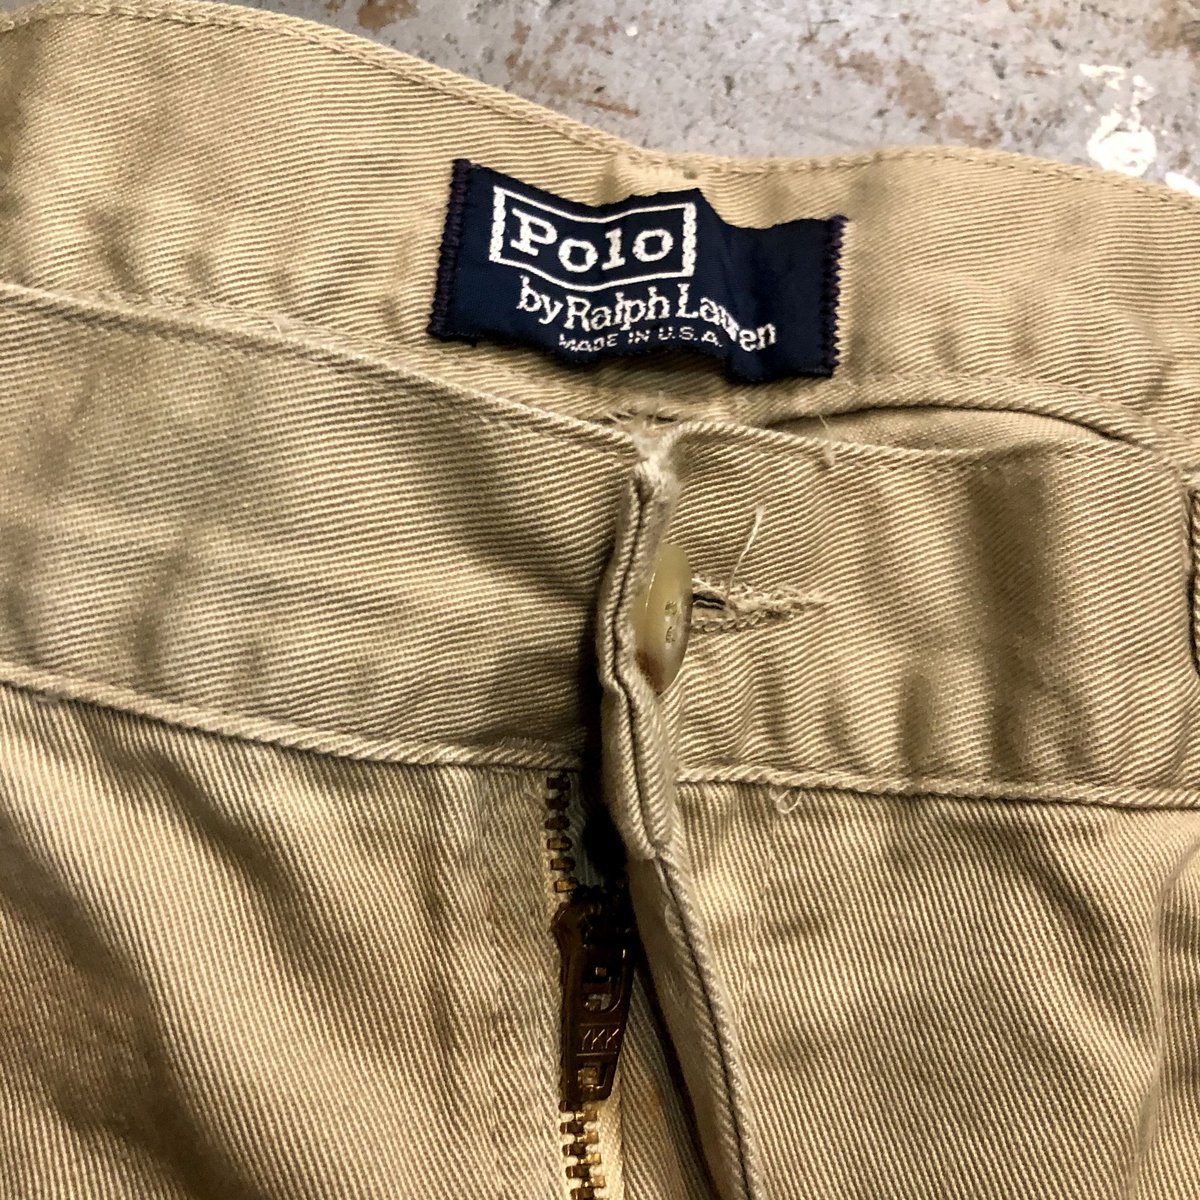 80~90s Polo Ralph Lauren Chino Pants Made in USA Dead Stock W35 L32